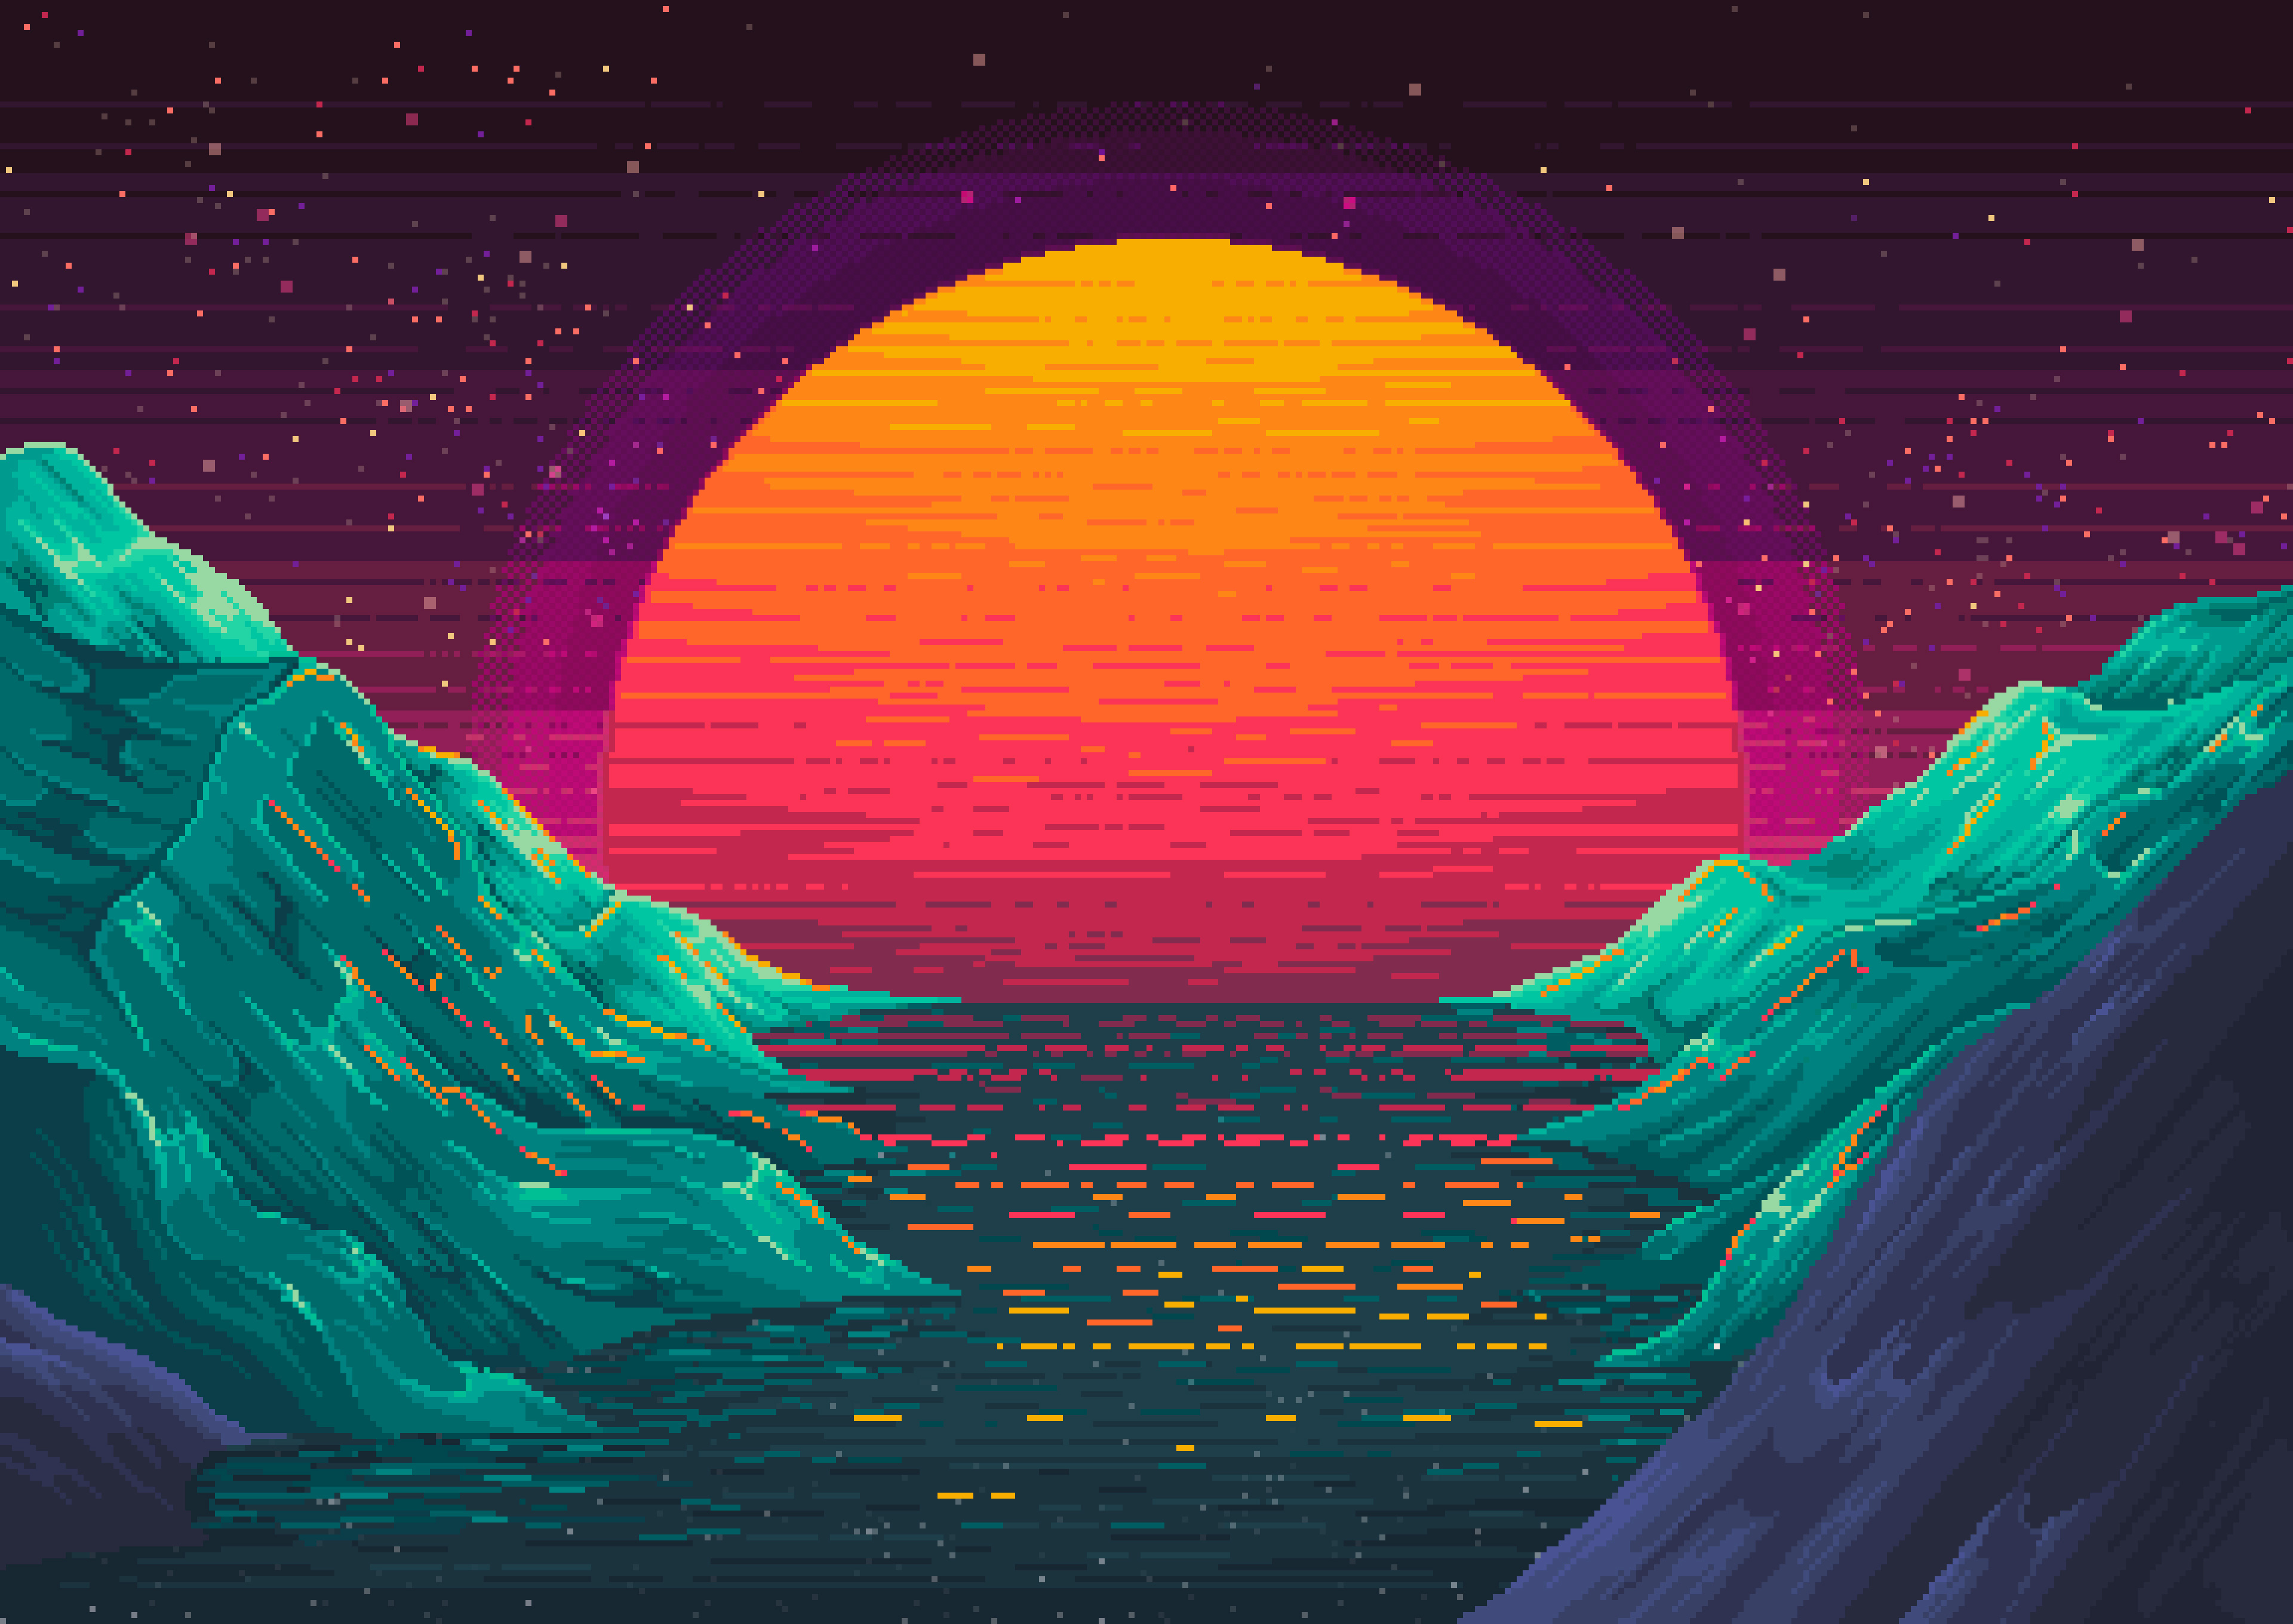 8bit wallpapers youll totally want for your Android